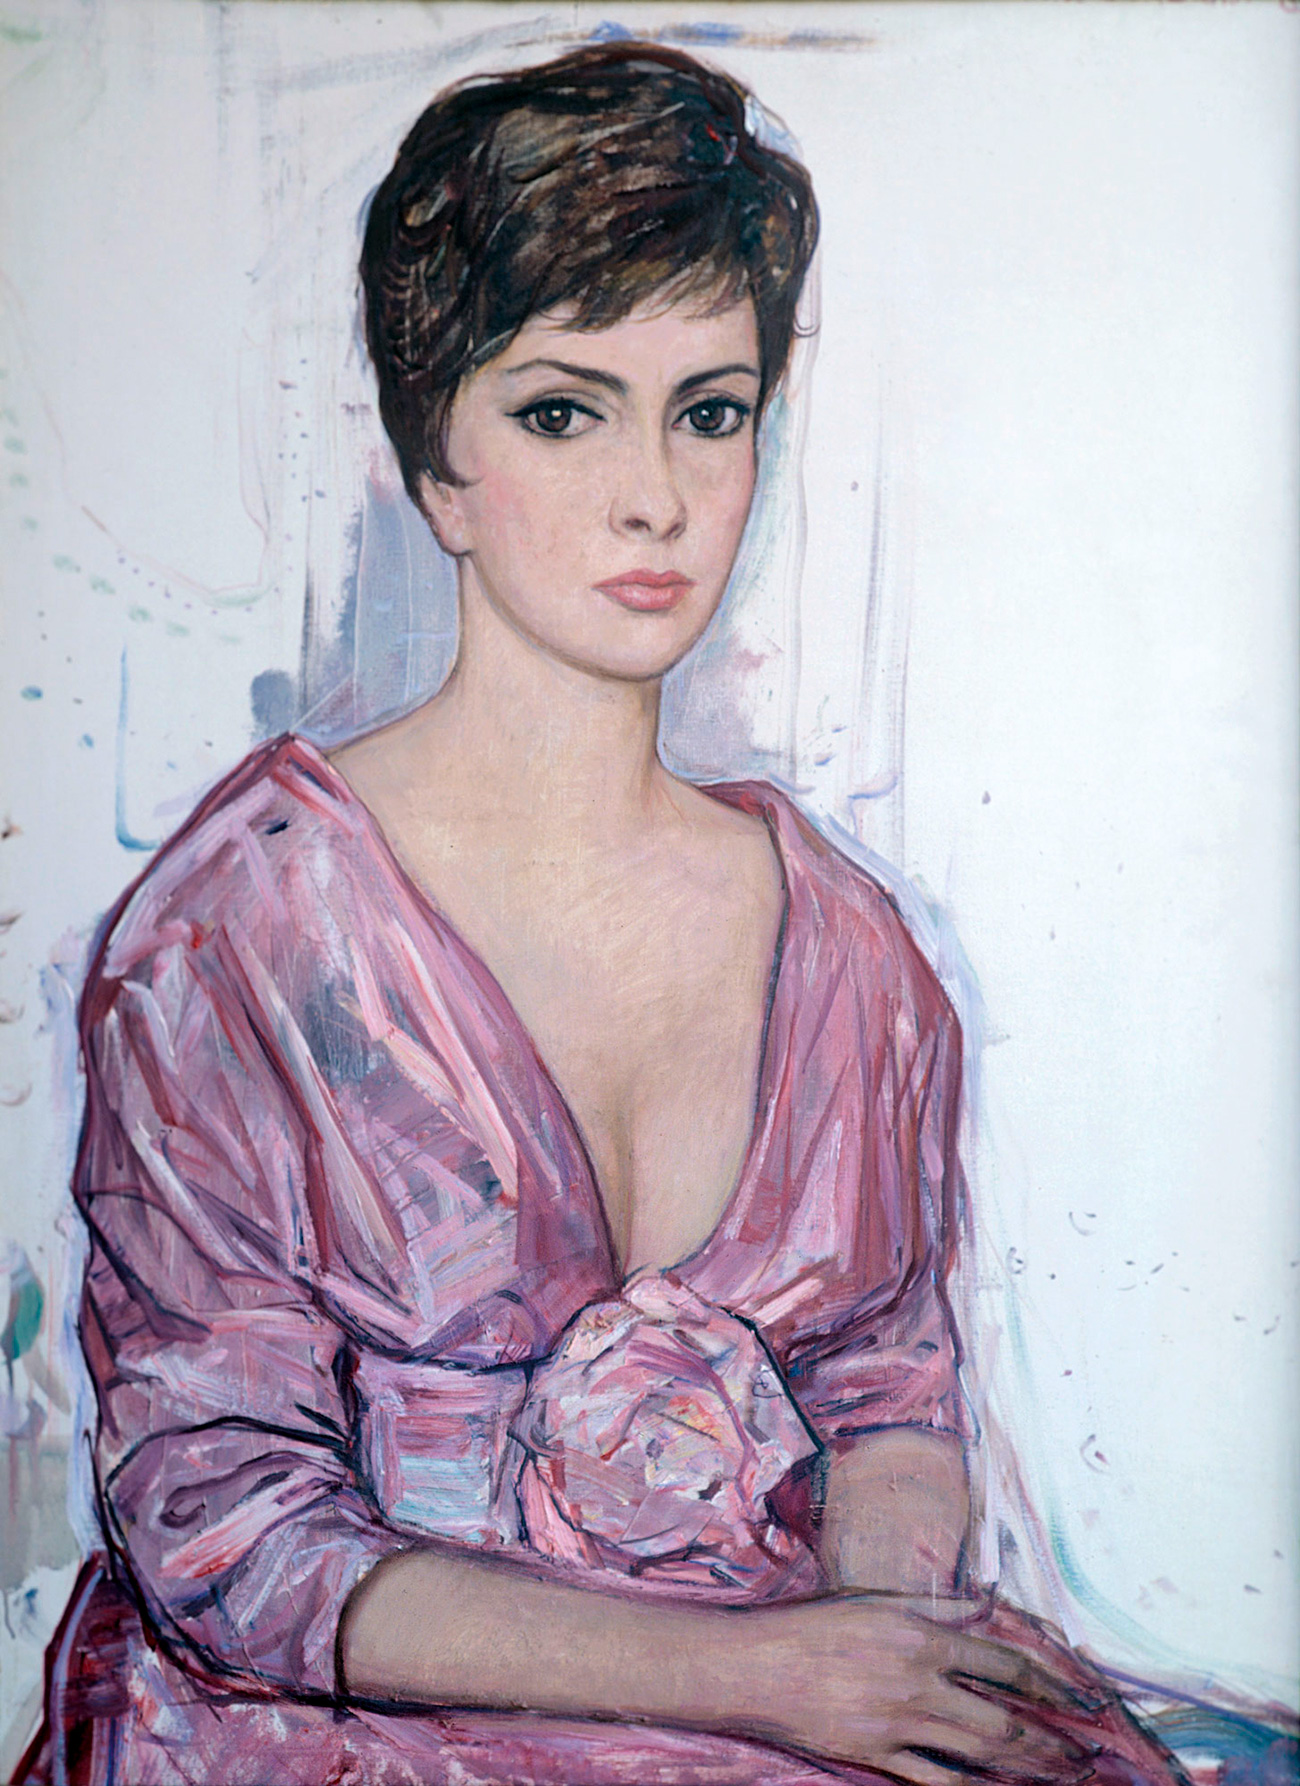 He painted portraits of many famous and beautiful women and some of them, such as Italian actress Gina Lollobrigida, couldn’t resist a charming young painter. In 1961, they met in Moscow and two years later he visited her in Rome. Glazunov himself admitted that he couldn’t resist female beauty, but pointed out that his romantic affairs were nothing compared to his love for his one and only Nina. Tragically, in 1986 she jumped out of a window and it is not known to this day what prompted her. Glazunov could never accept that it was a suicide.